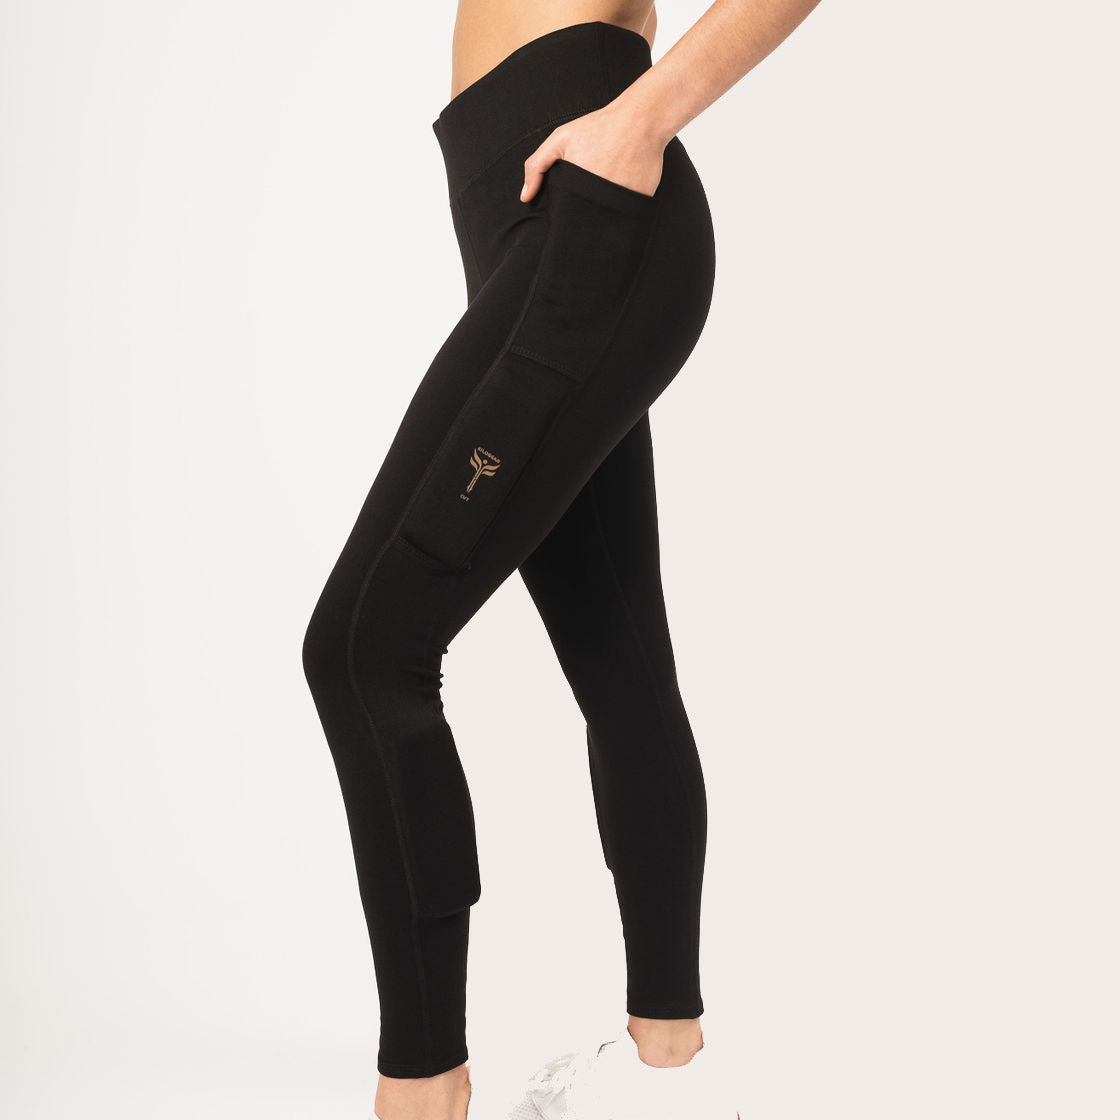 Woman's legs wearing black legging with the weights on the side of the leg above the knee on the quads and on the side of the shin. High waist and full length.